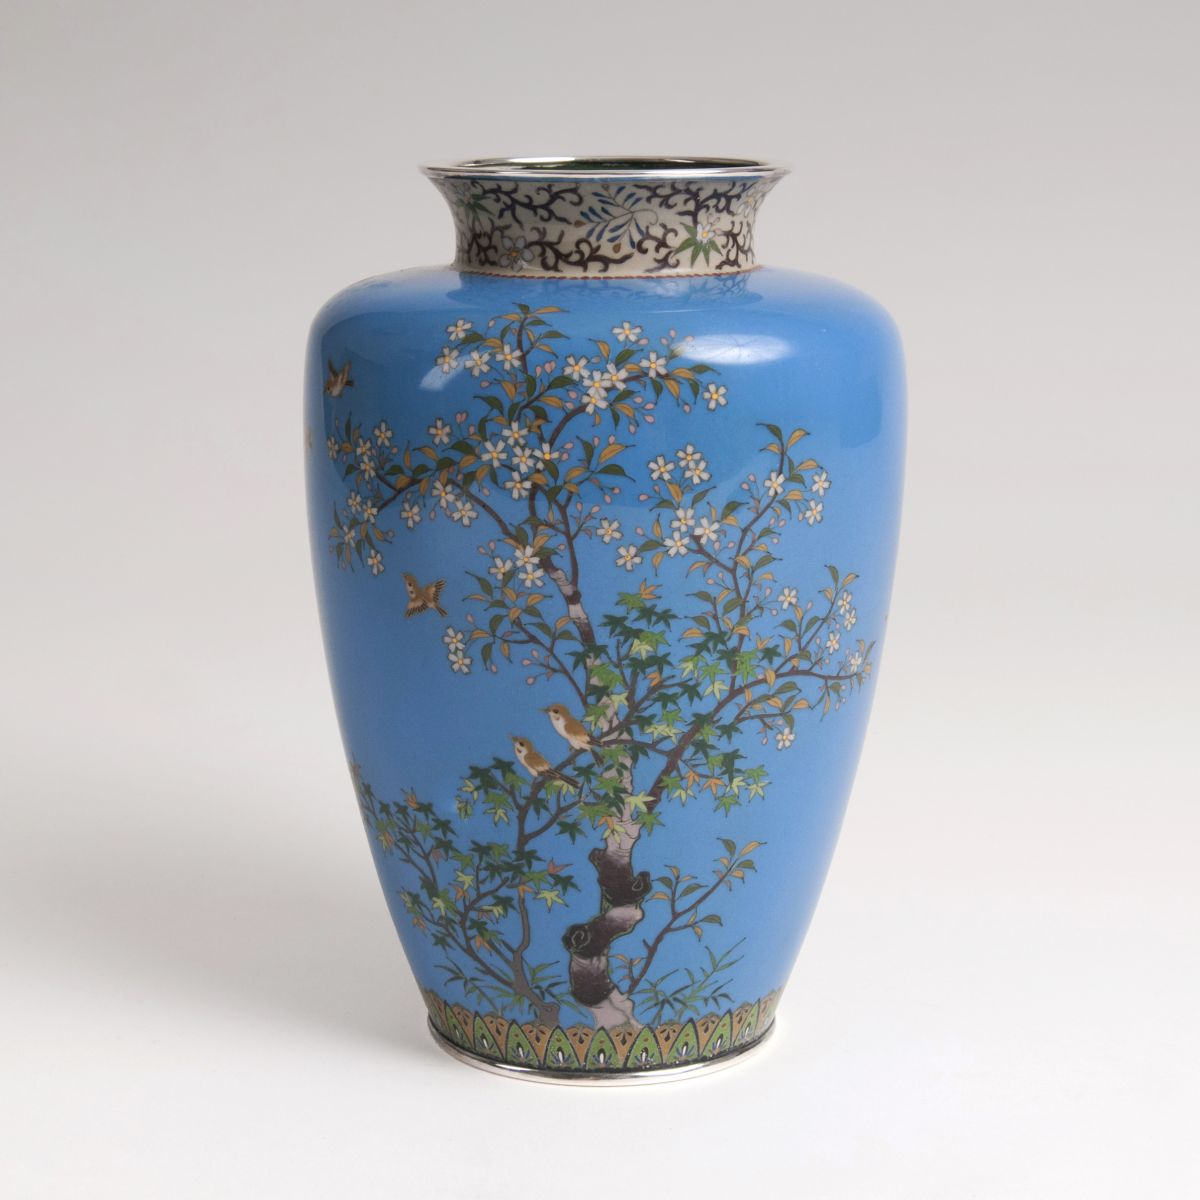 A Cloisonné vase with flowers and birds